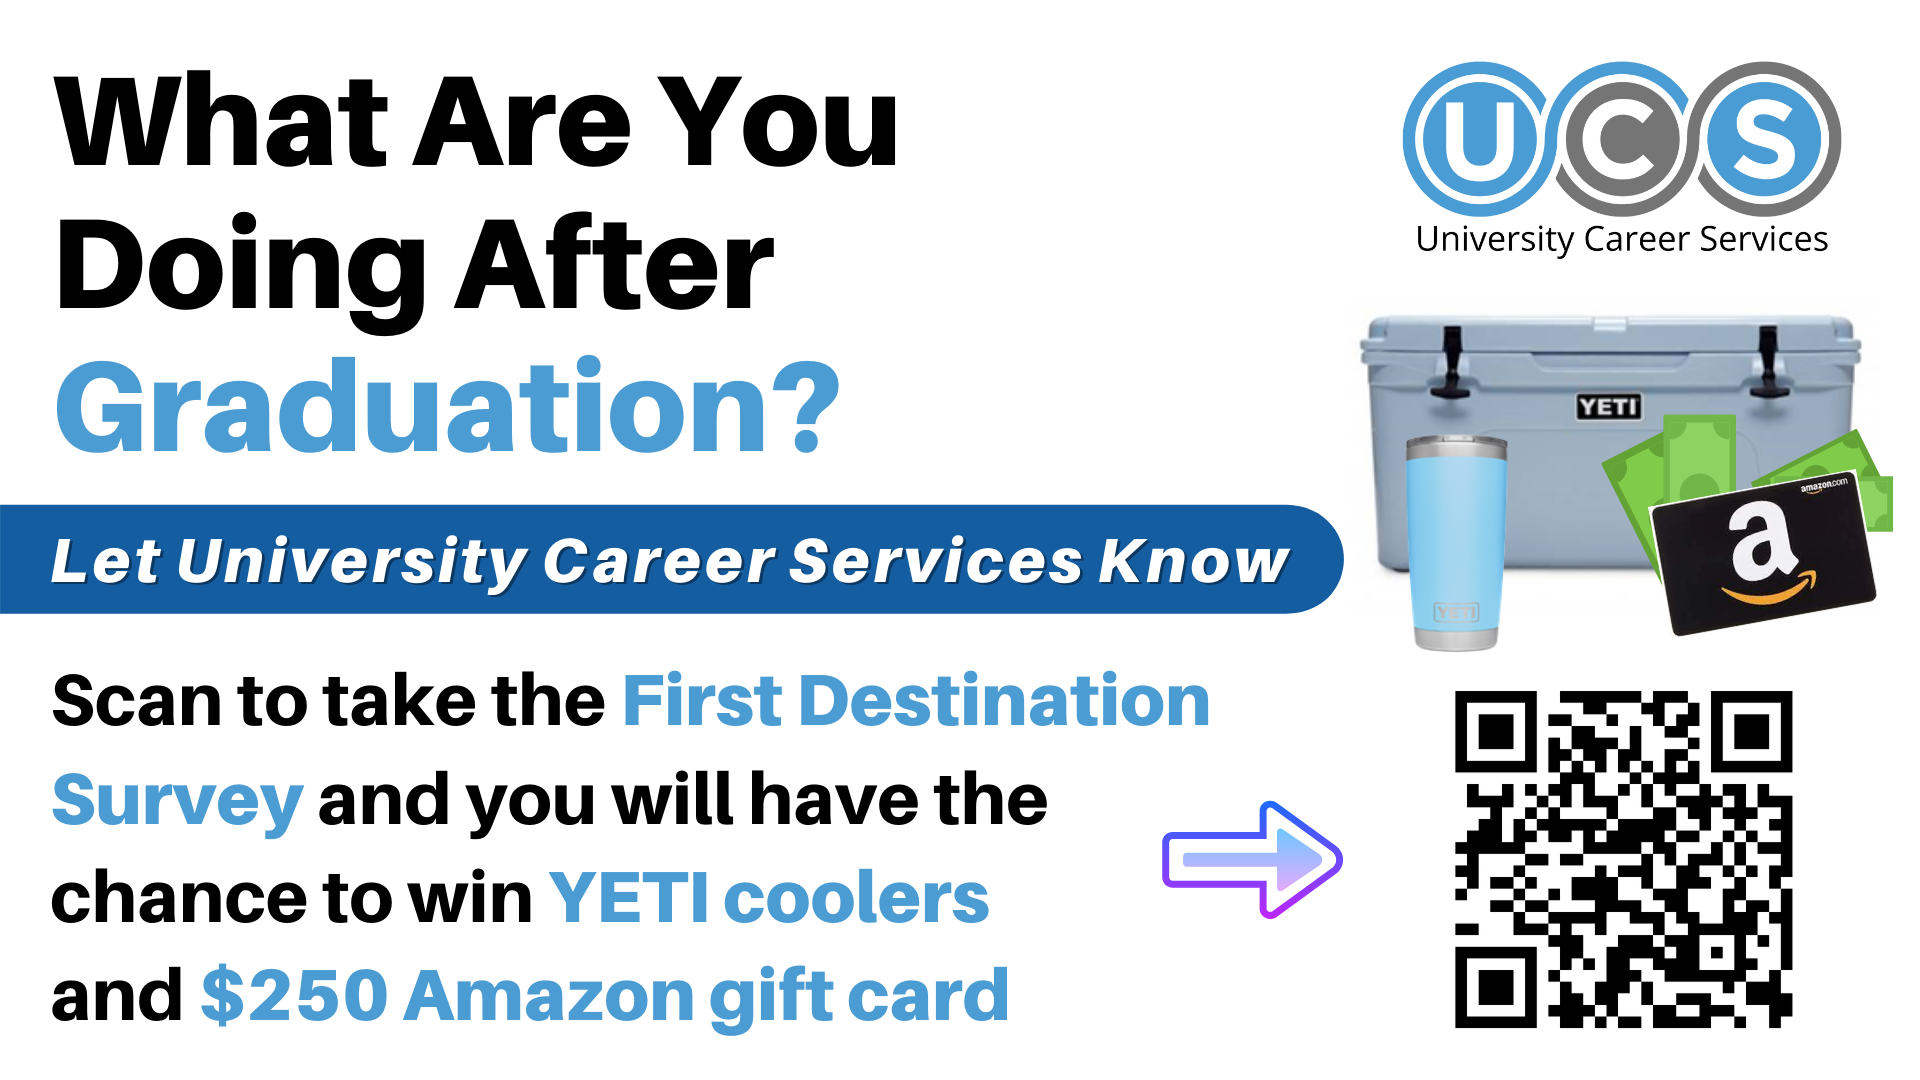 Scan to take the First Destination Survey and you will have the chance to win YETI coolers and $250 Amazon gift card 